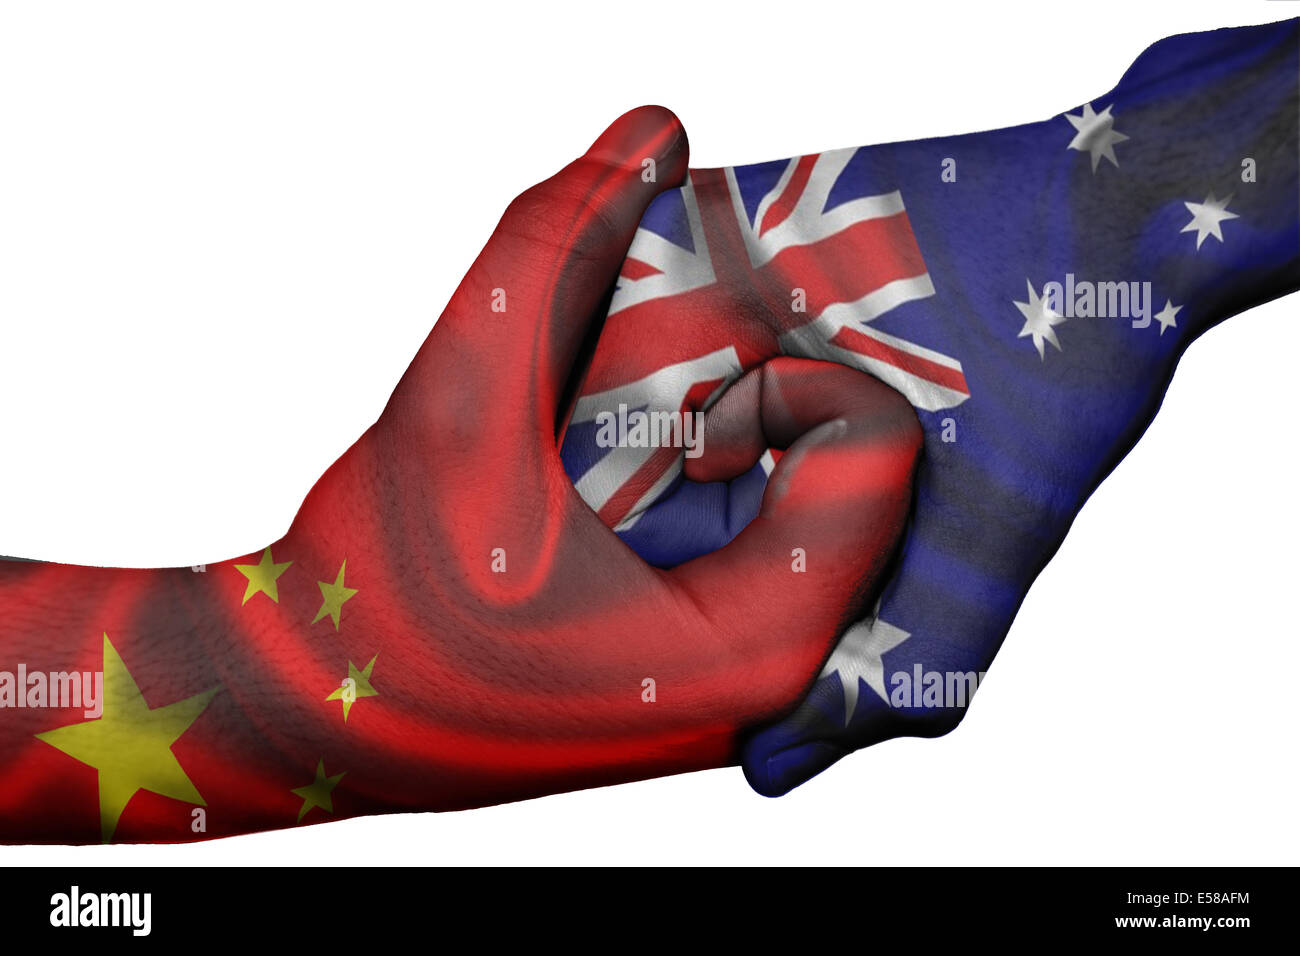 Diplomatic handshake between countries: flags of China and Australia overprinted the two hands Stock Photo